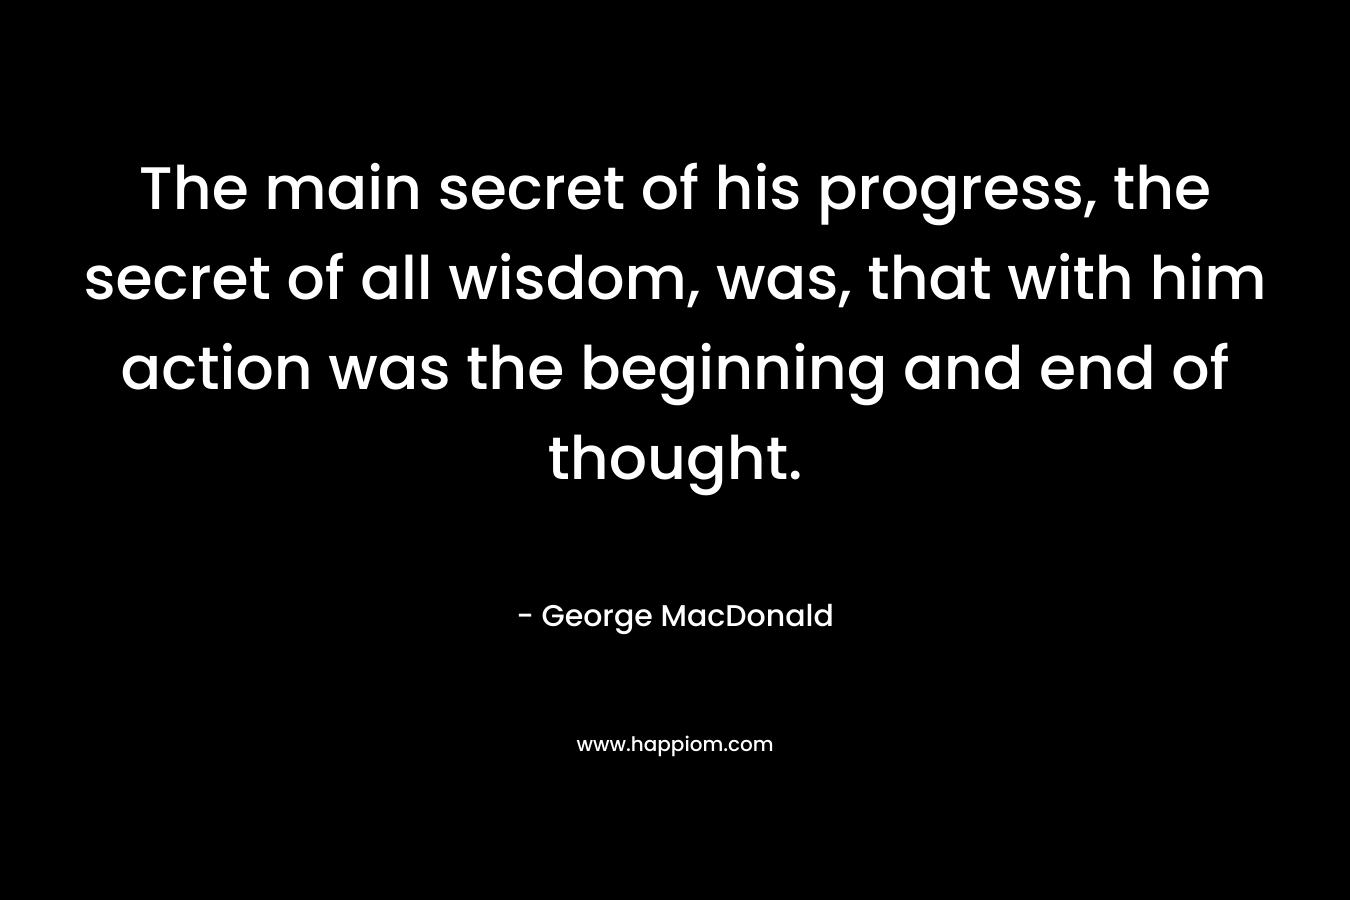 The main secret of his progress, the secret of all wisdom, was, that with him action was the beginning and end of thought.